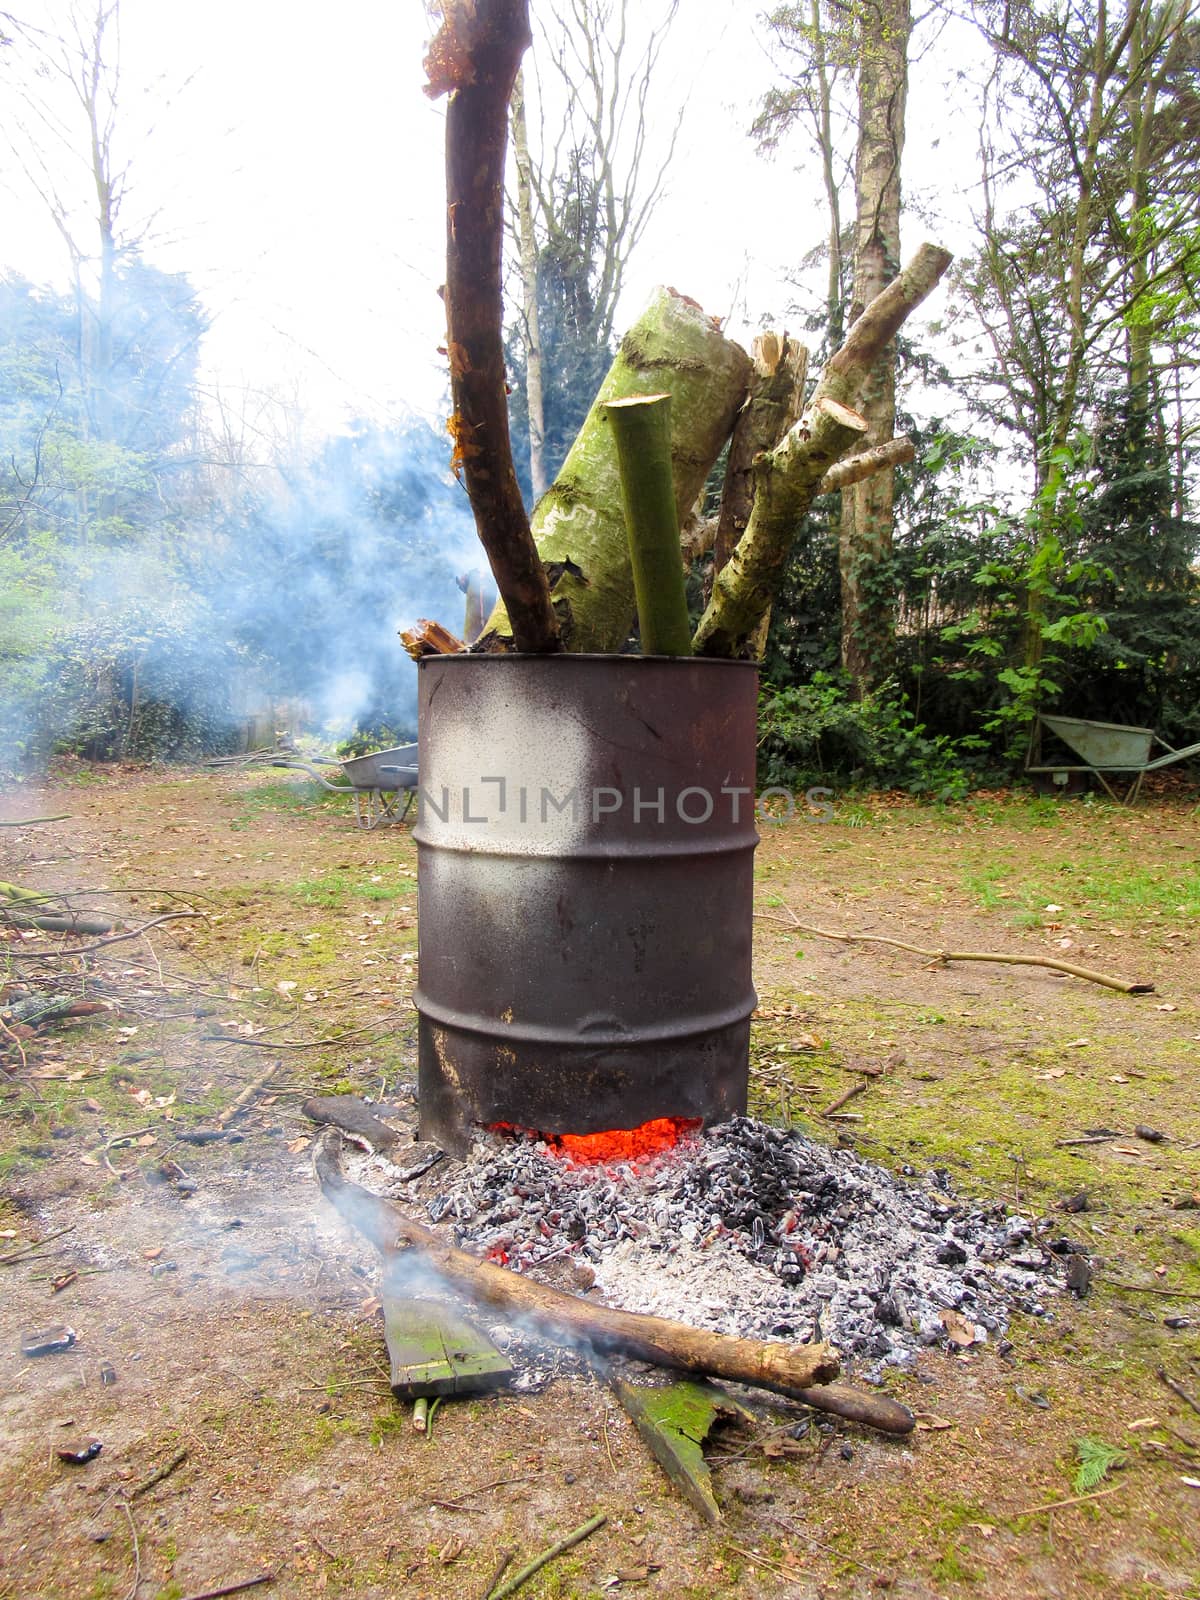 Barrel being used to burn excess wood inside a forrest in a clearing